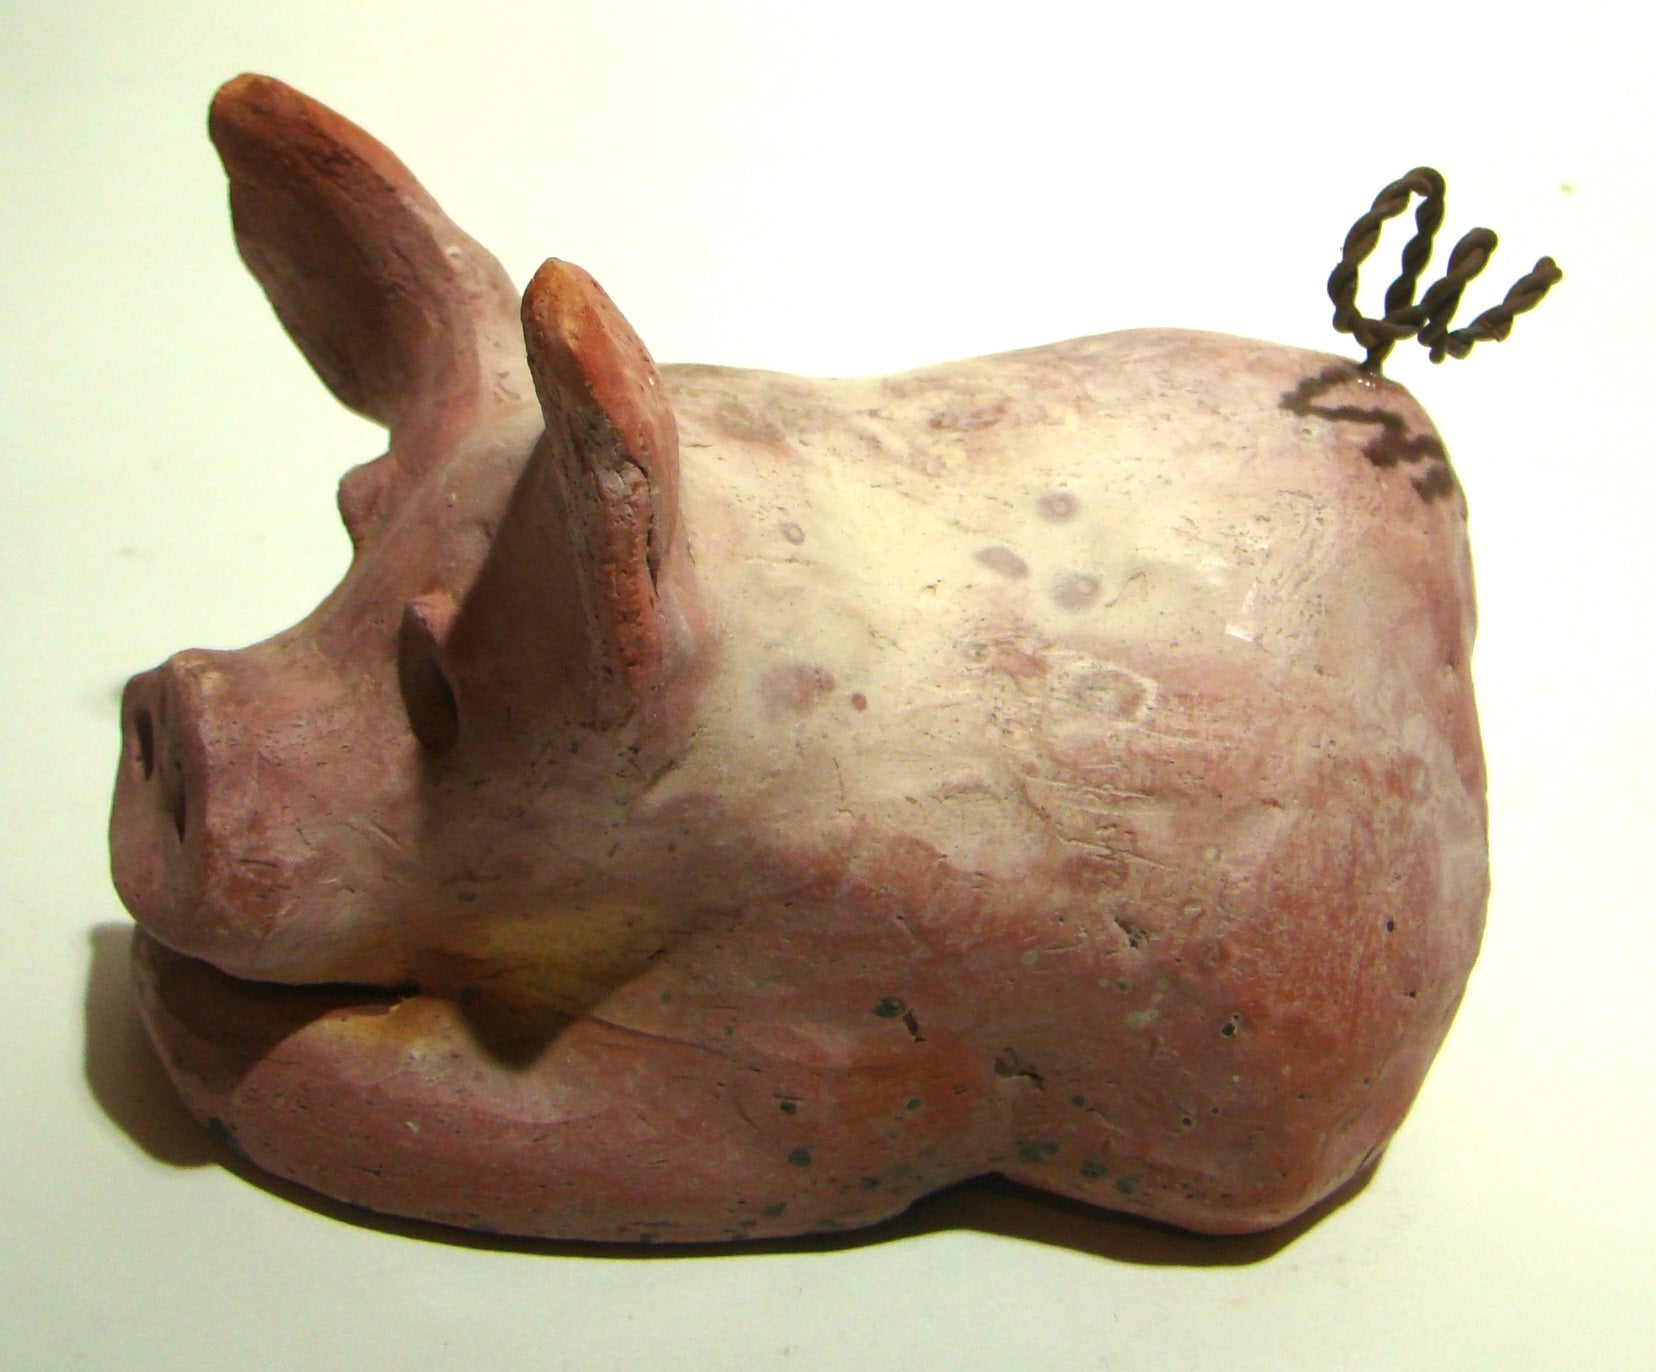 This Little Piggy is 4" x 5' x 6" and weighs 1.8 lbs